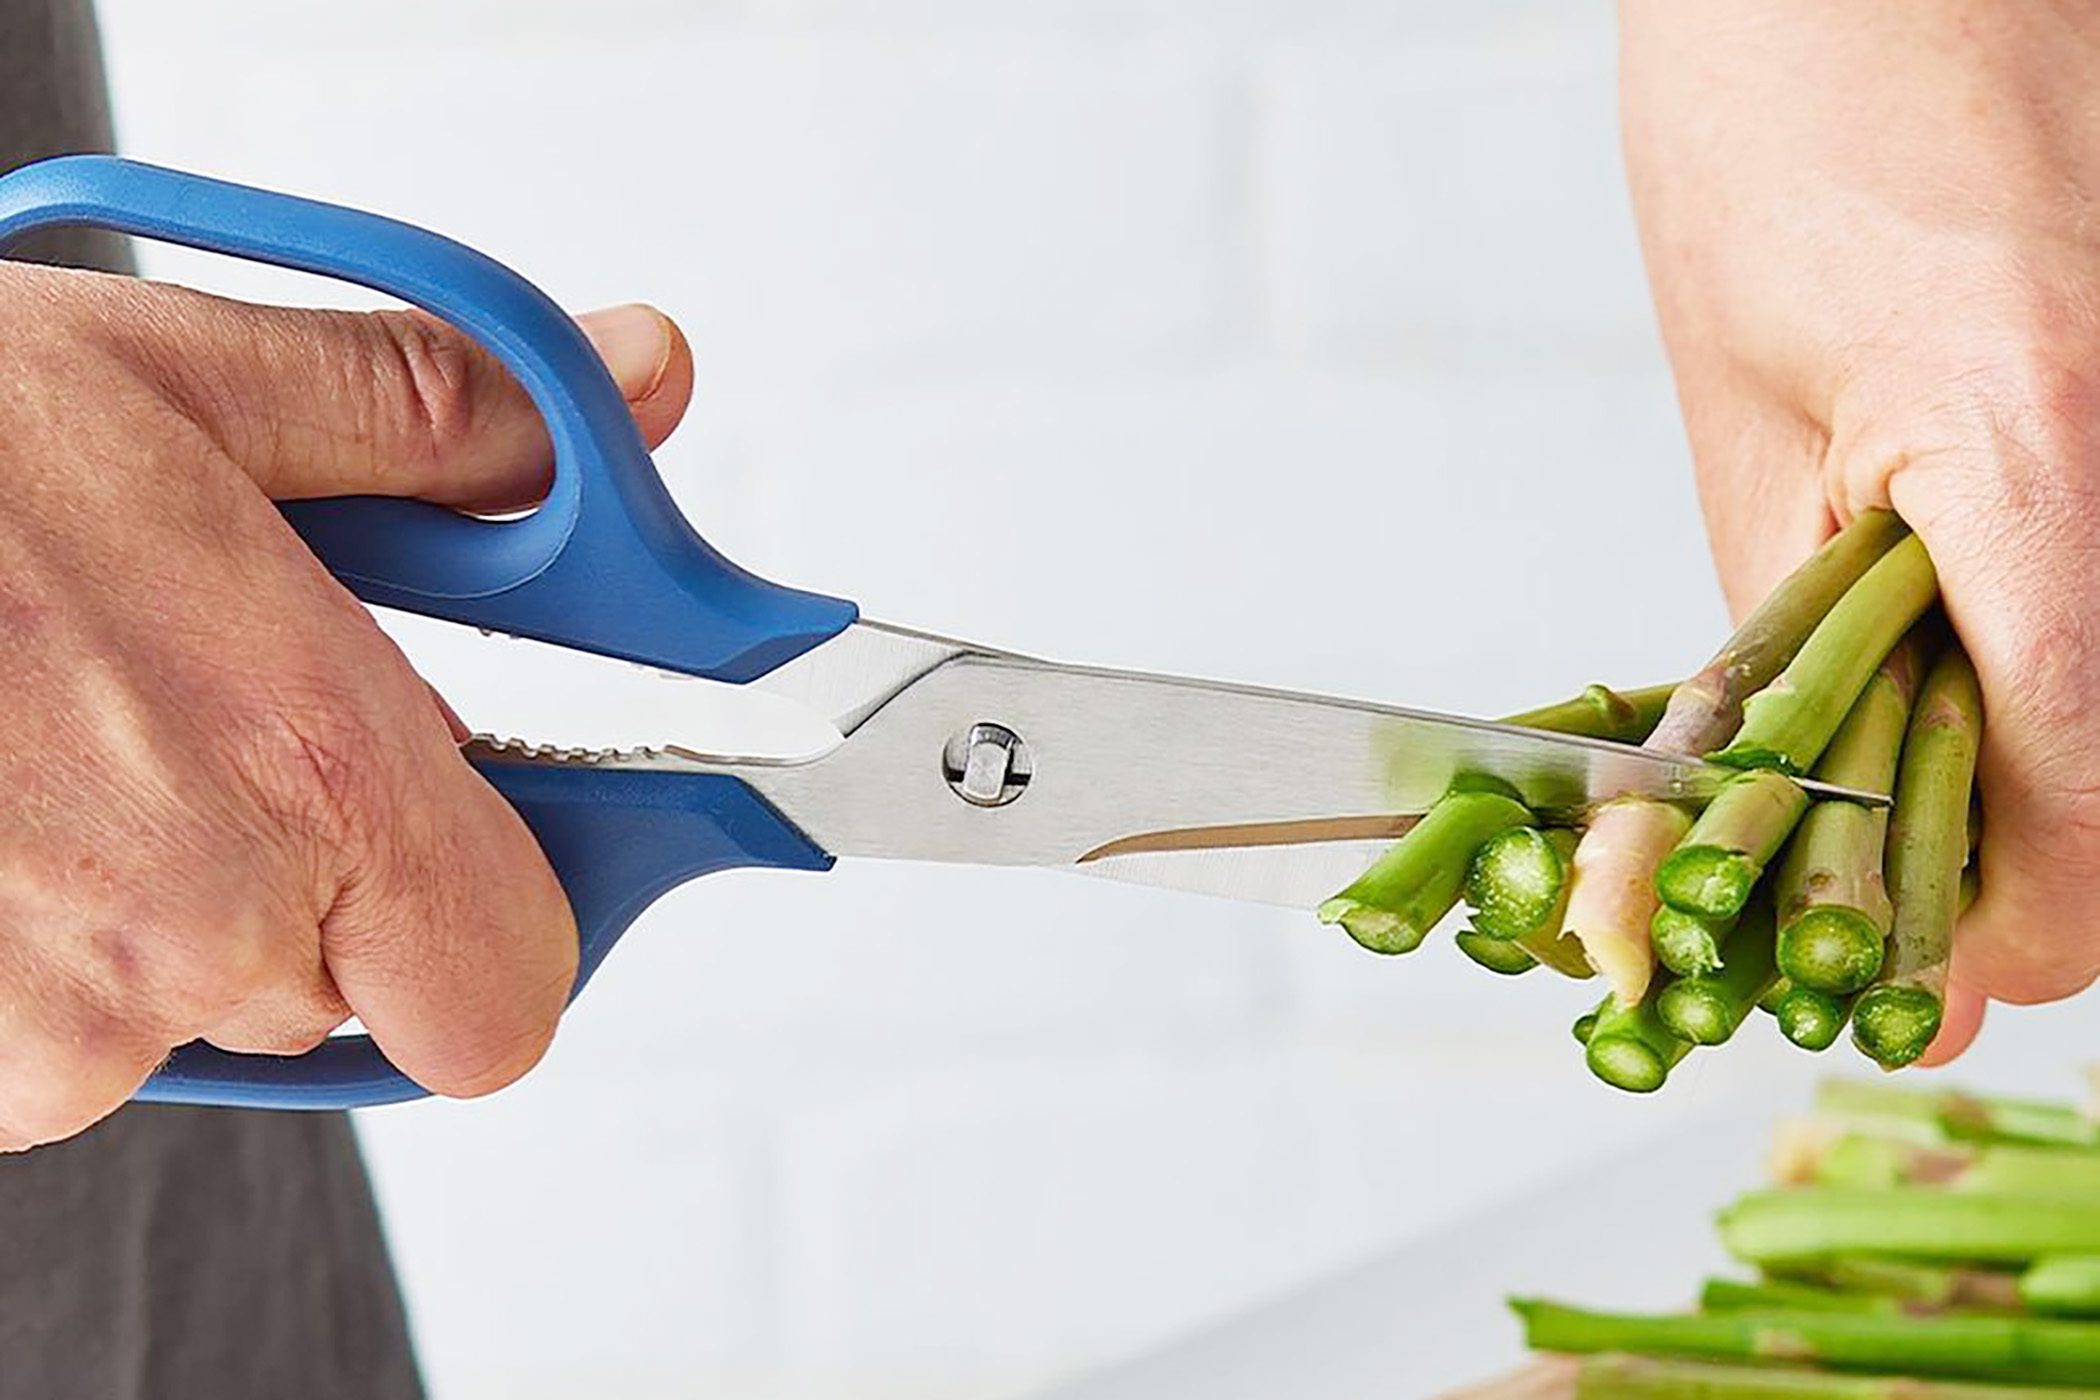 Misen Kitchen Shears Just Launched & They're Incredibly Strong